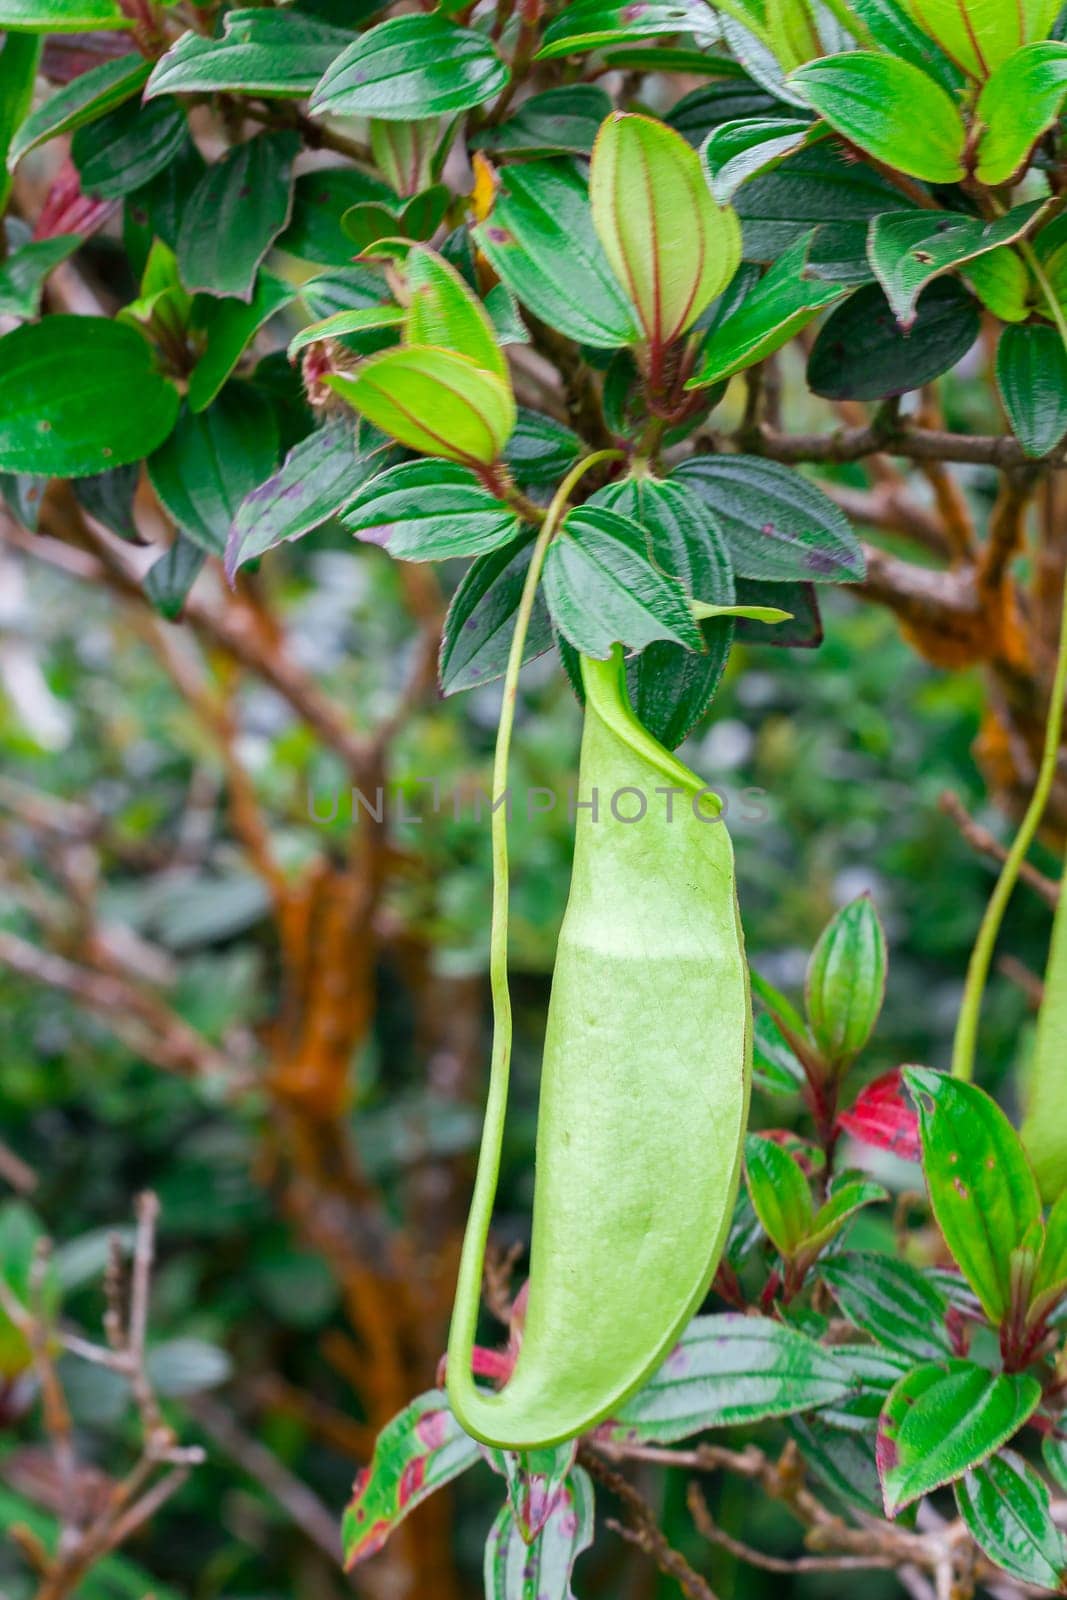 Nepenthes in the natural forest Is a type of animal eating plant